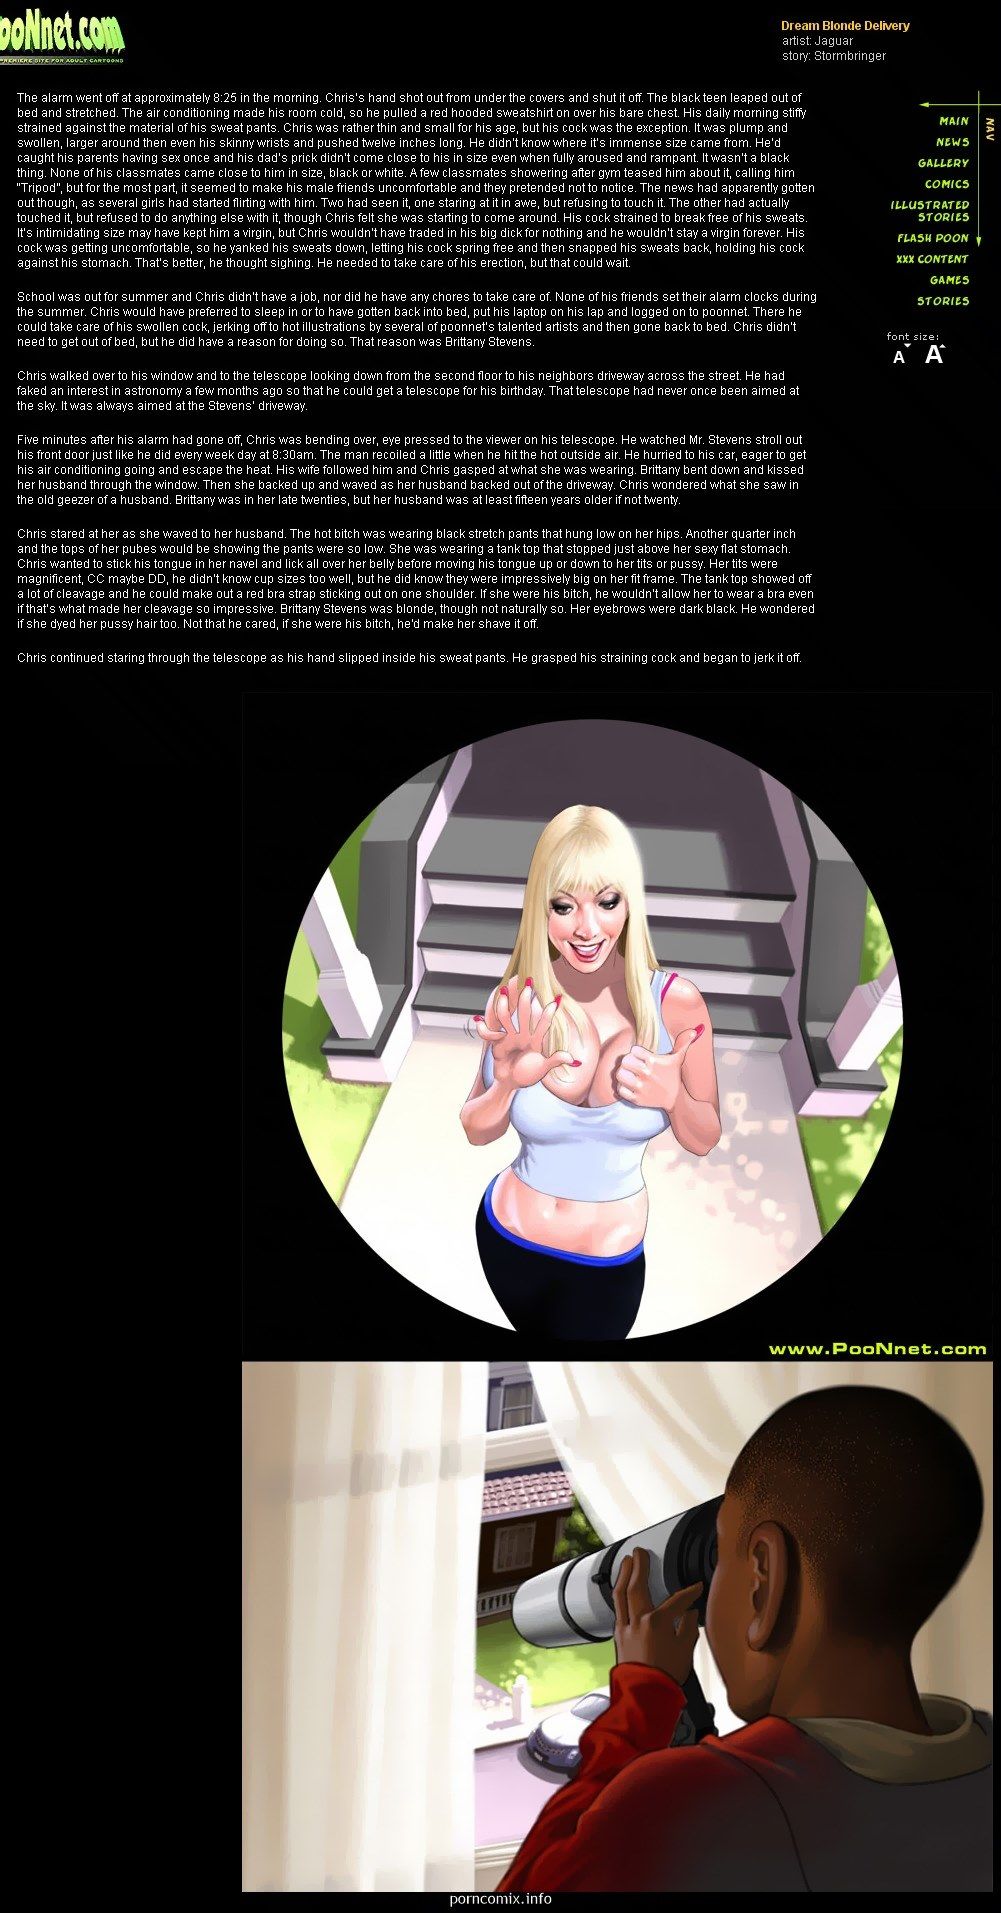 Poonnet - Dream Blonde Delivery page 1